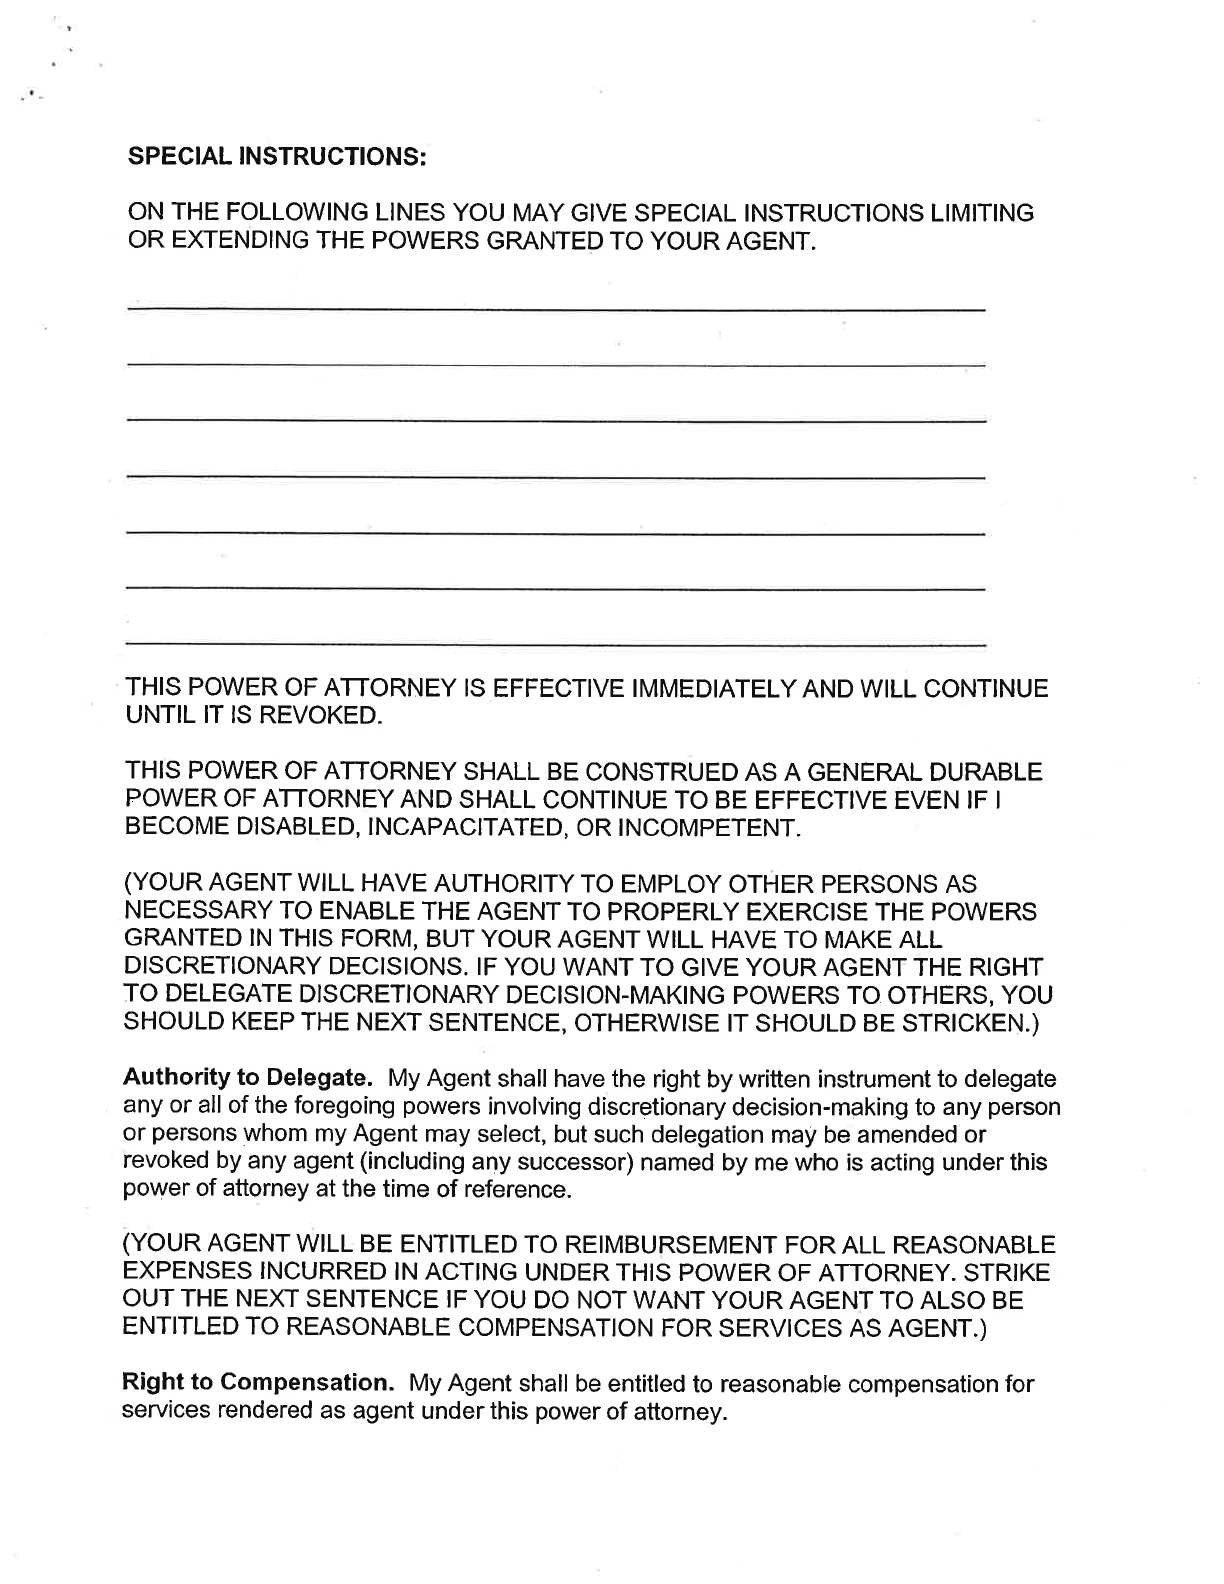 Maryland General Durable Power of Attorney Form